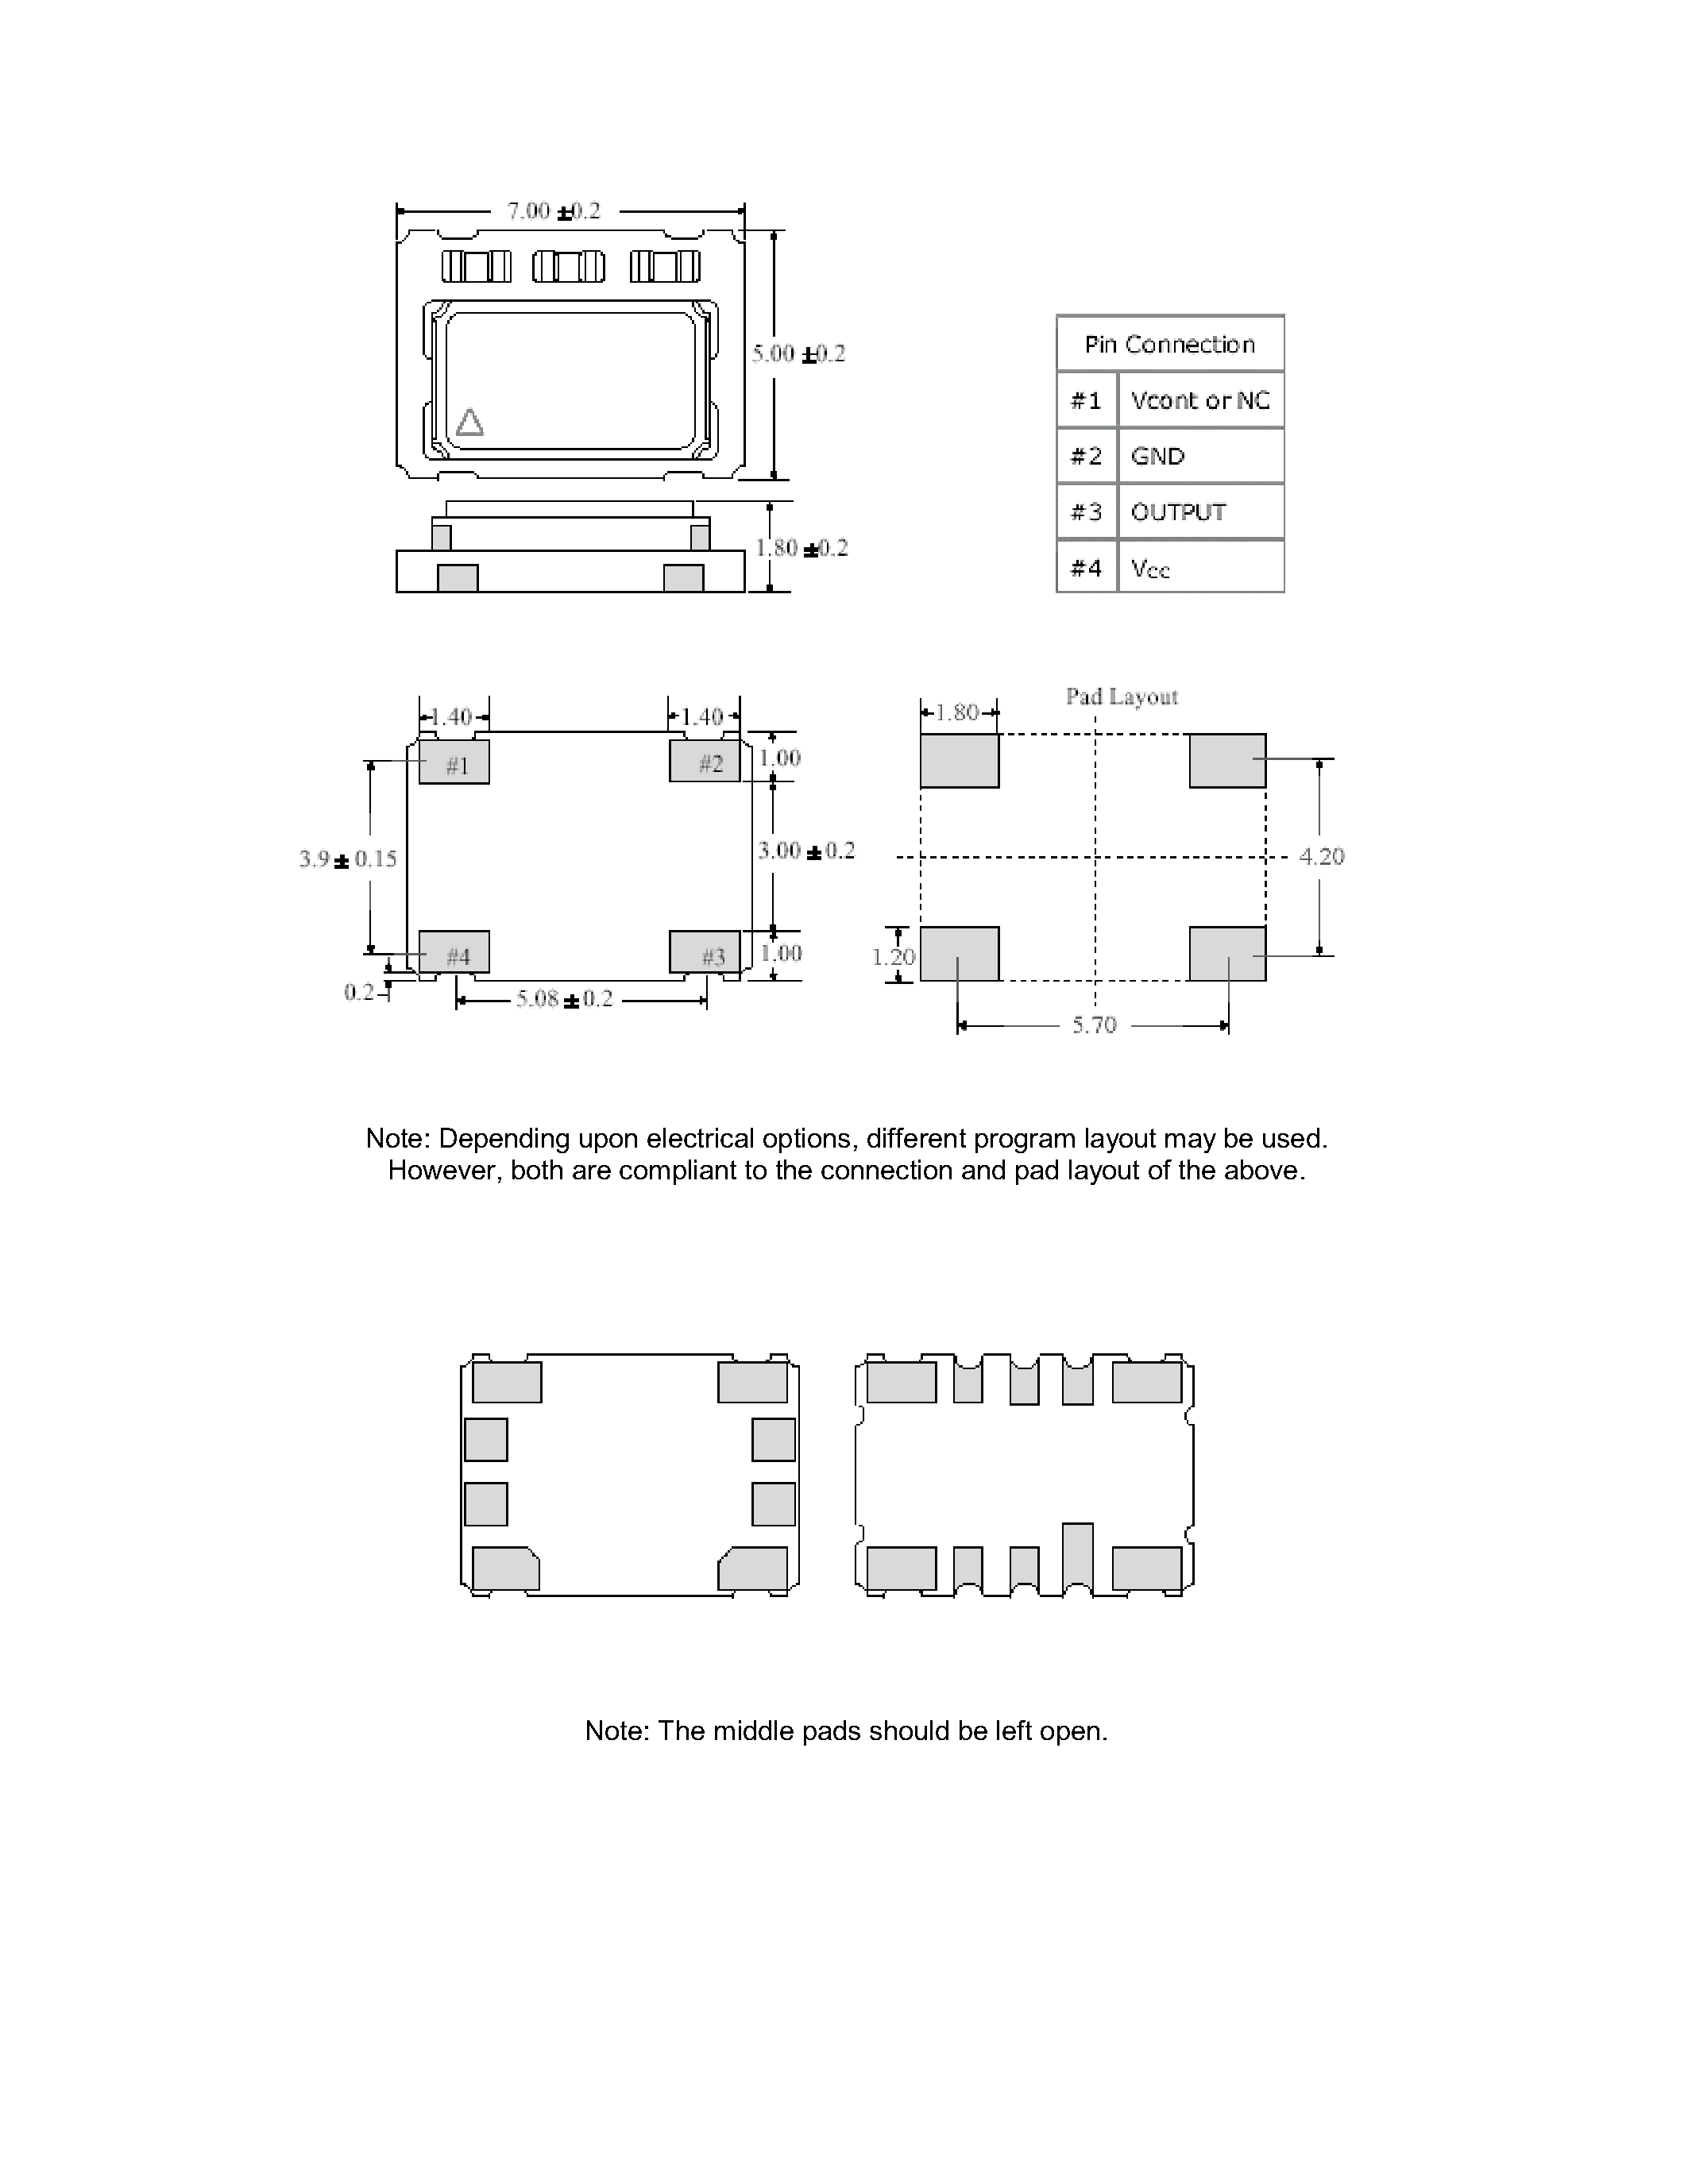 Datasheet VTC1 - High Performance in a 5x7 package page 2